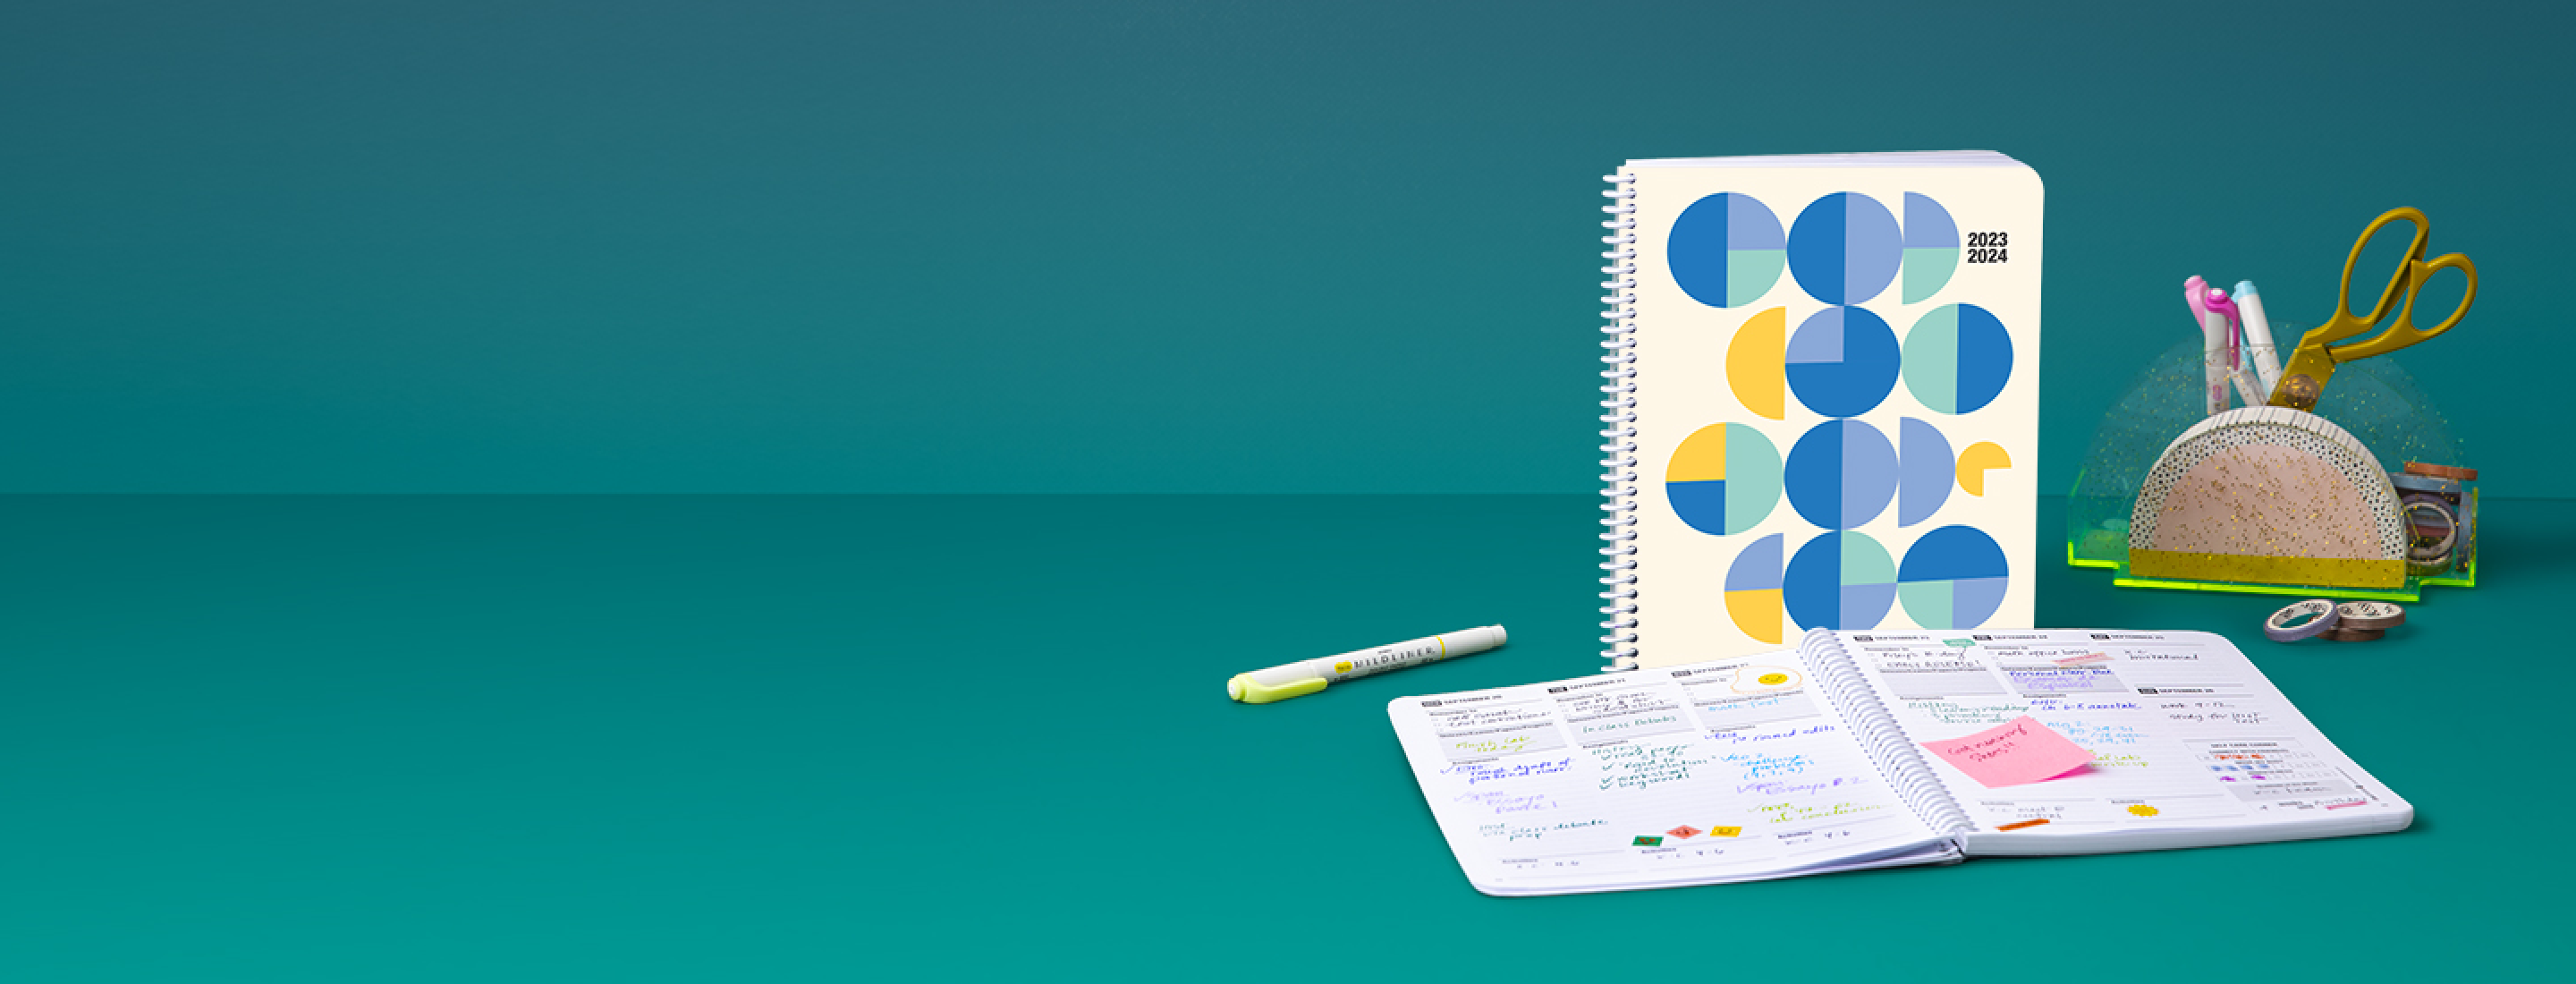 How to organize and color code your notes for school, college or university  – All About Planners